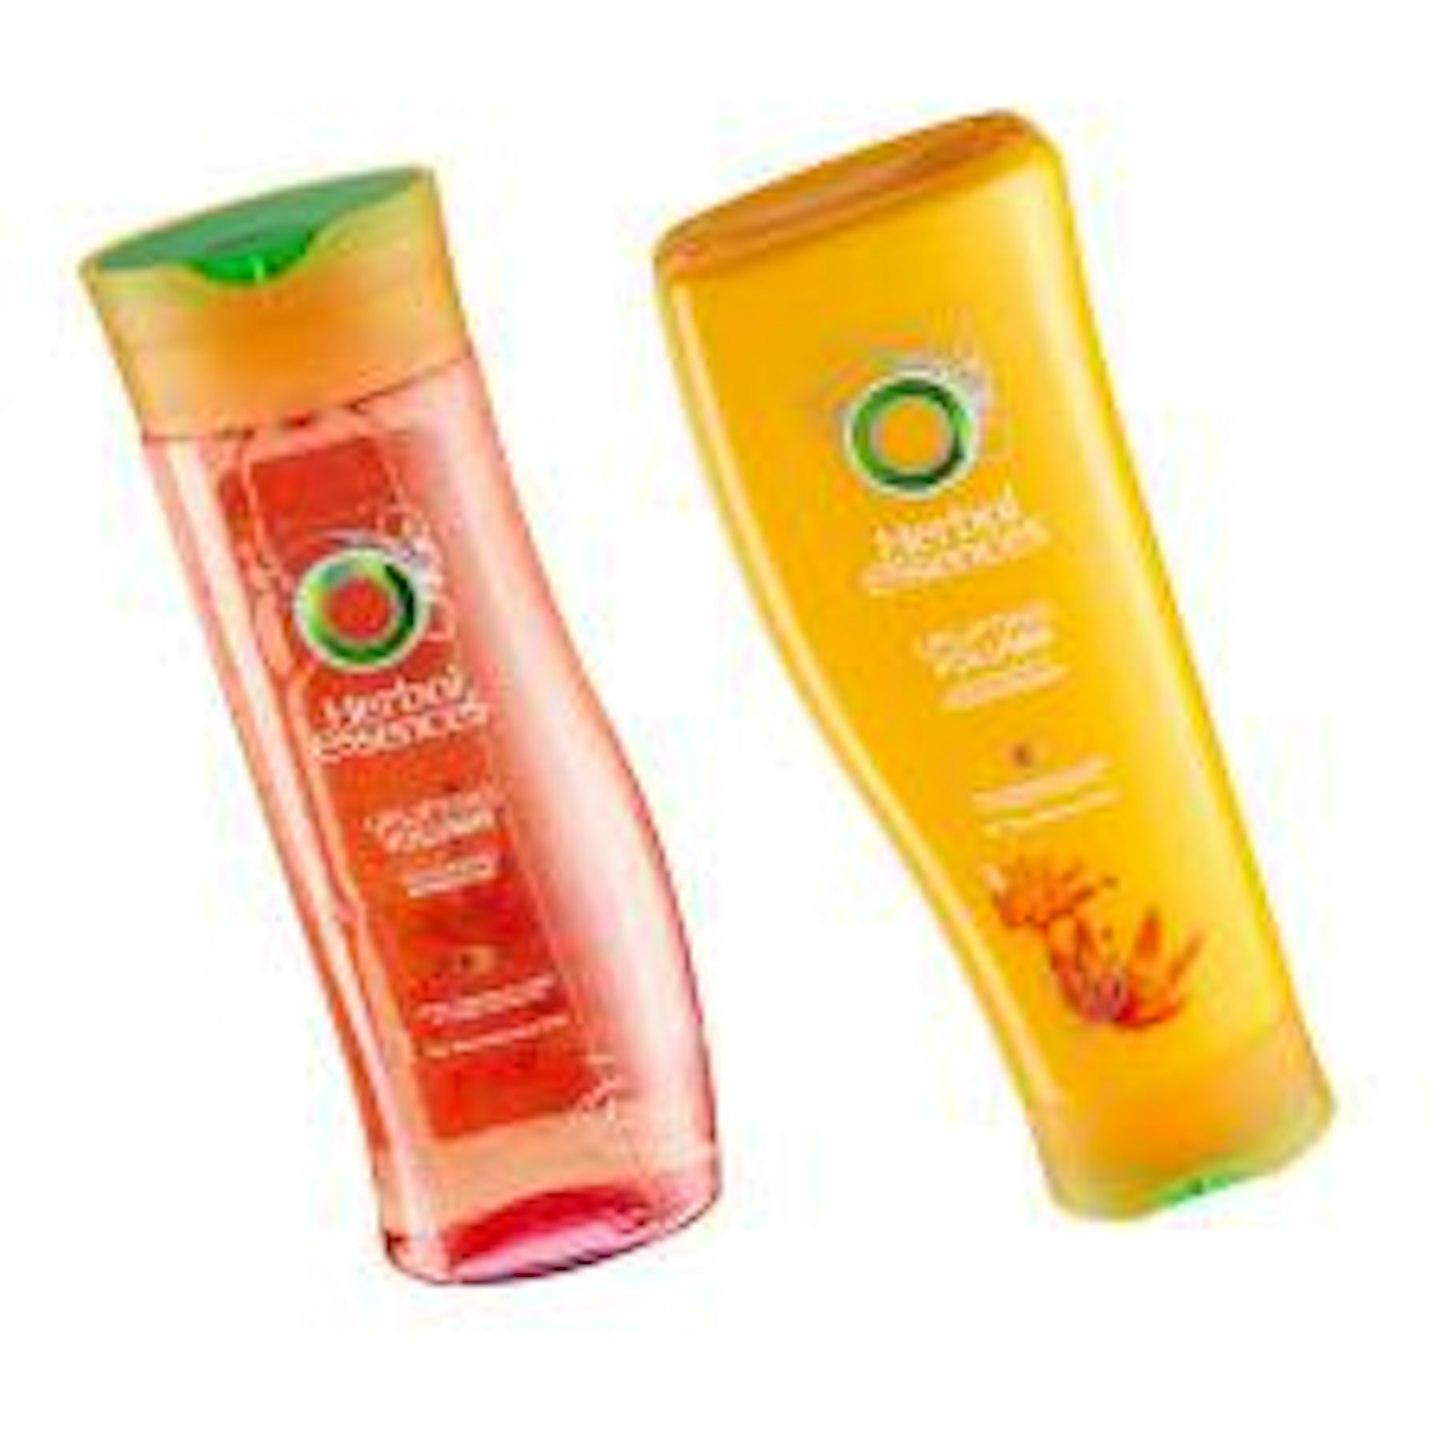 Herbal Essences Uplifting Shampoo and Conditioner £2.04 each